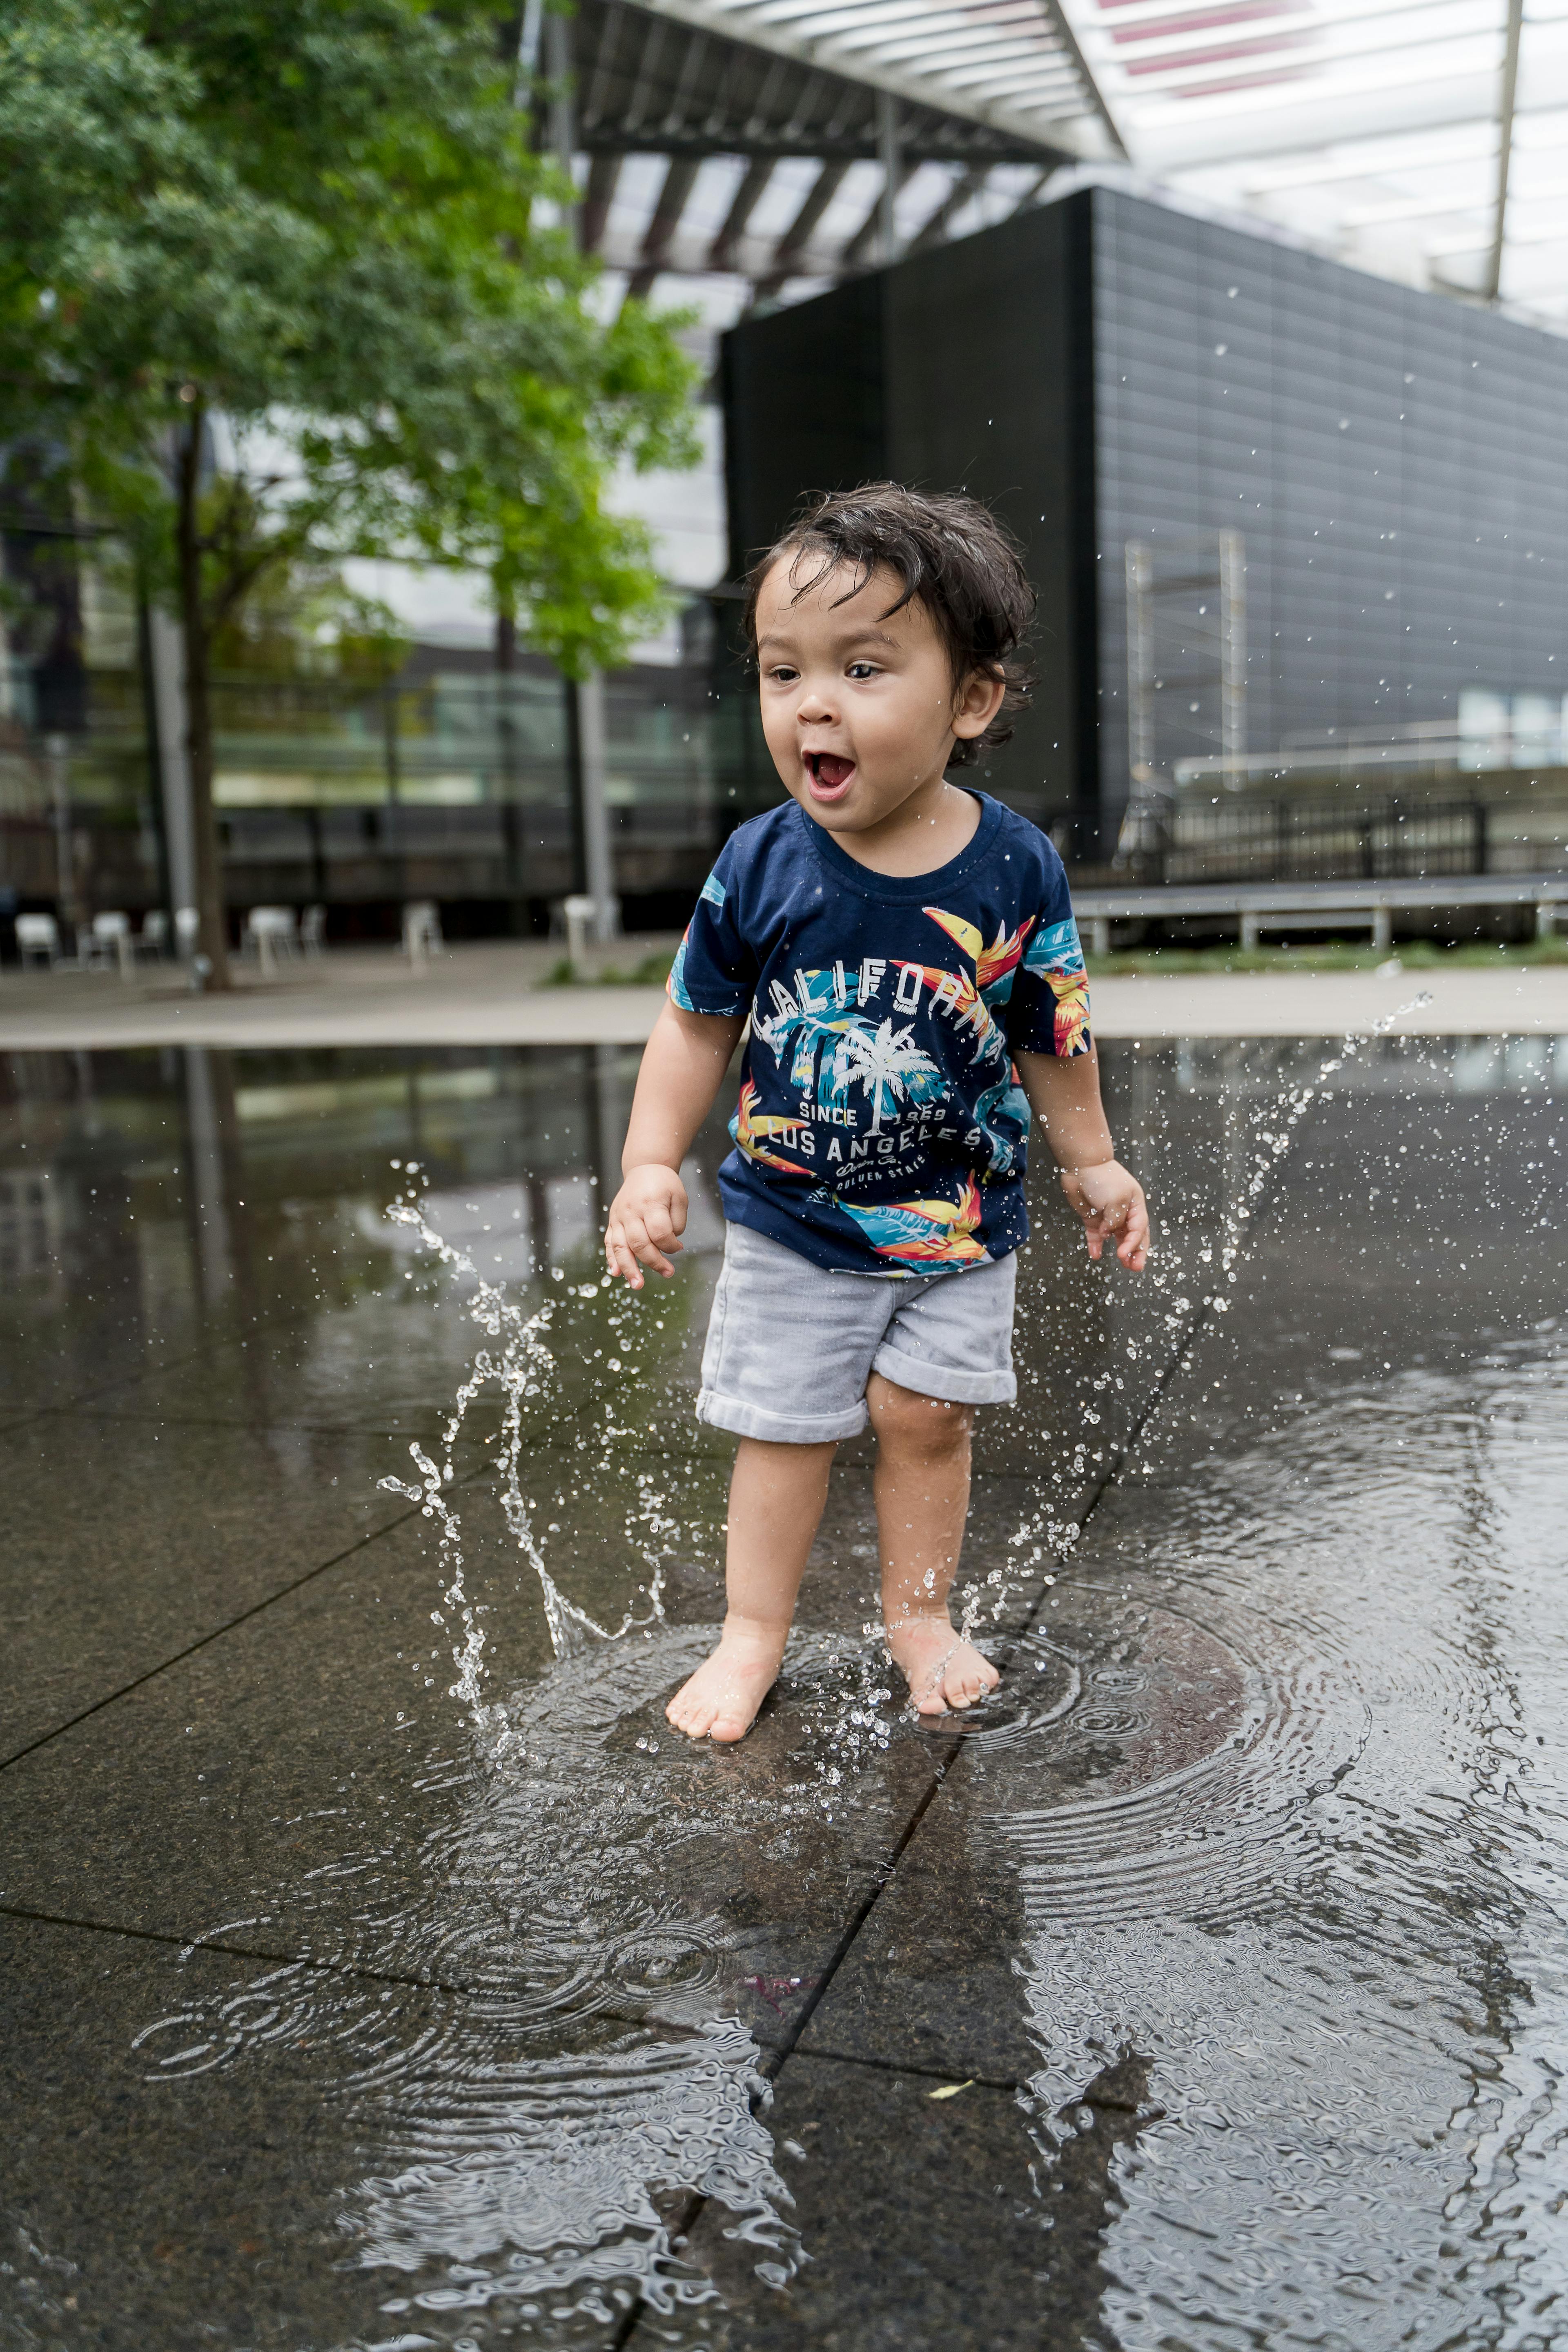 A joyful toddler playing in water on a wet urban surface.